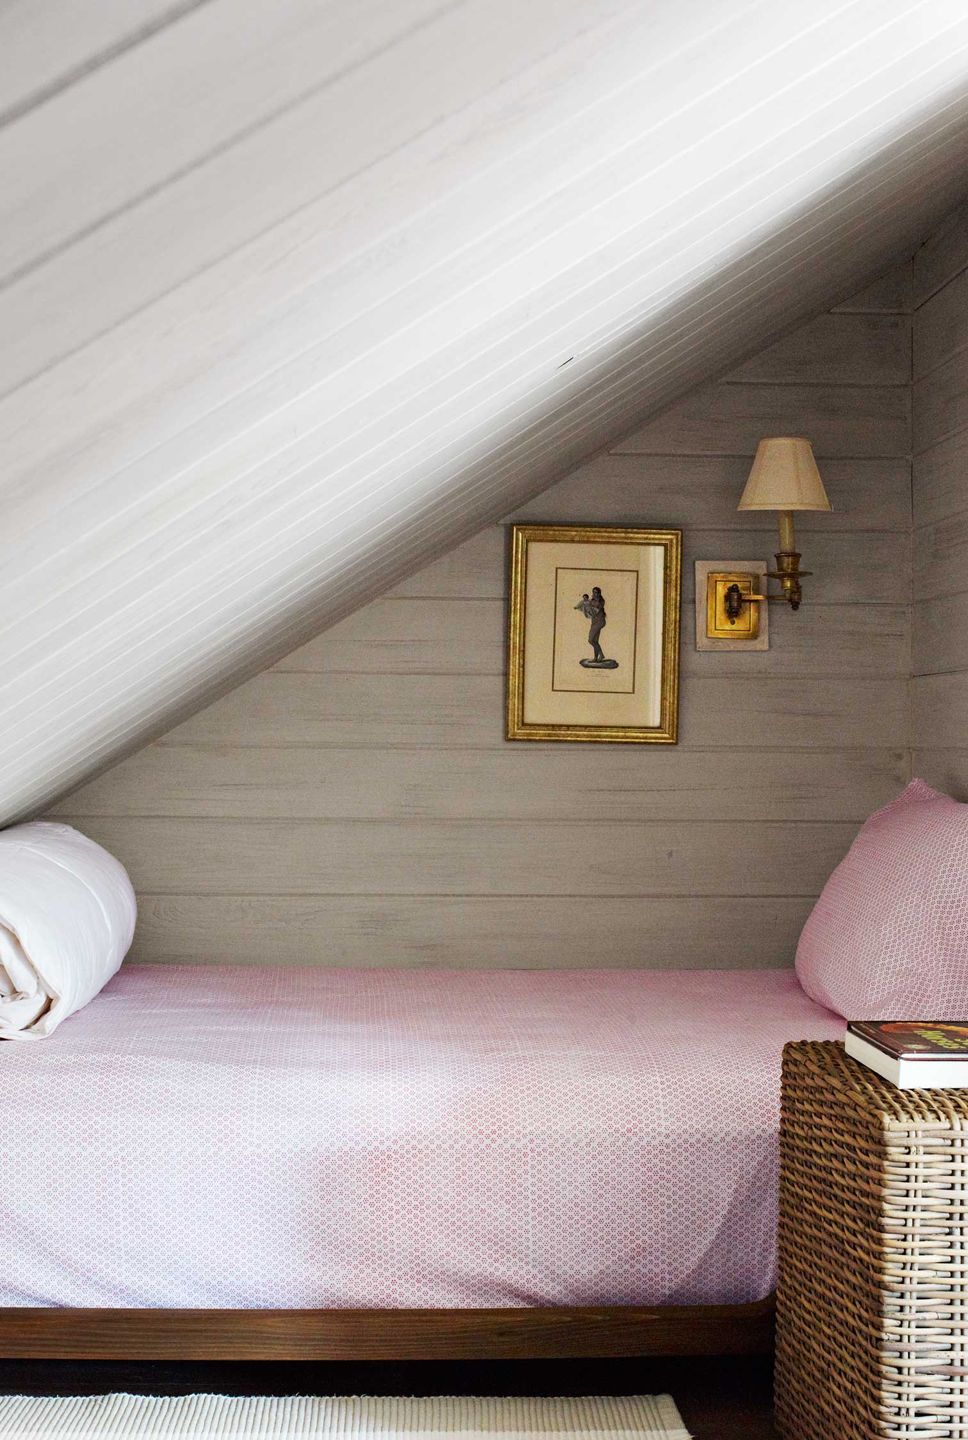 7 Things You Need for a Super Cosy Bedroom